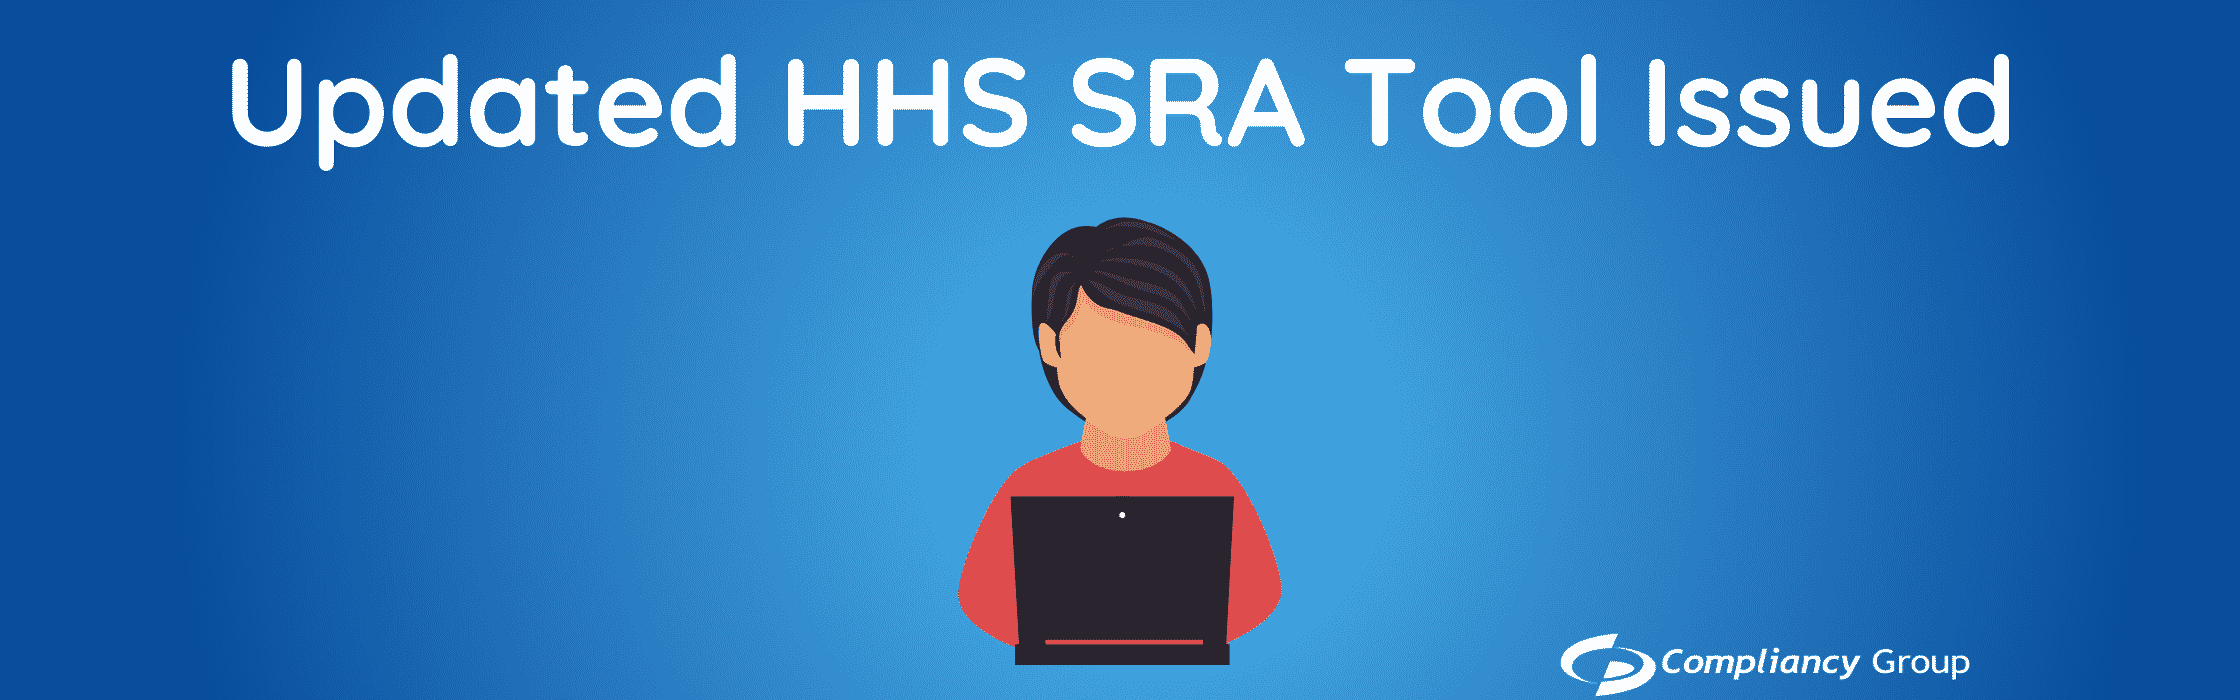 Updated HHS SRA Tool